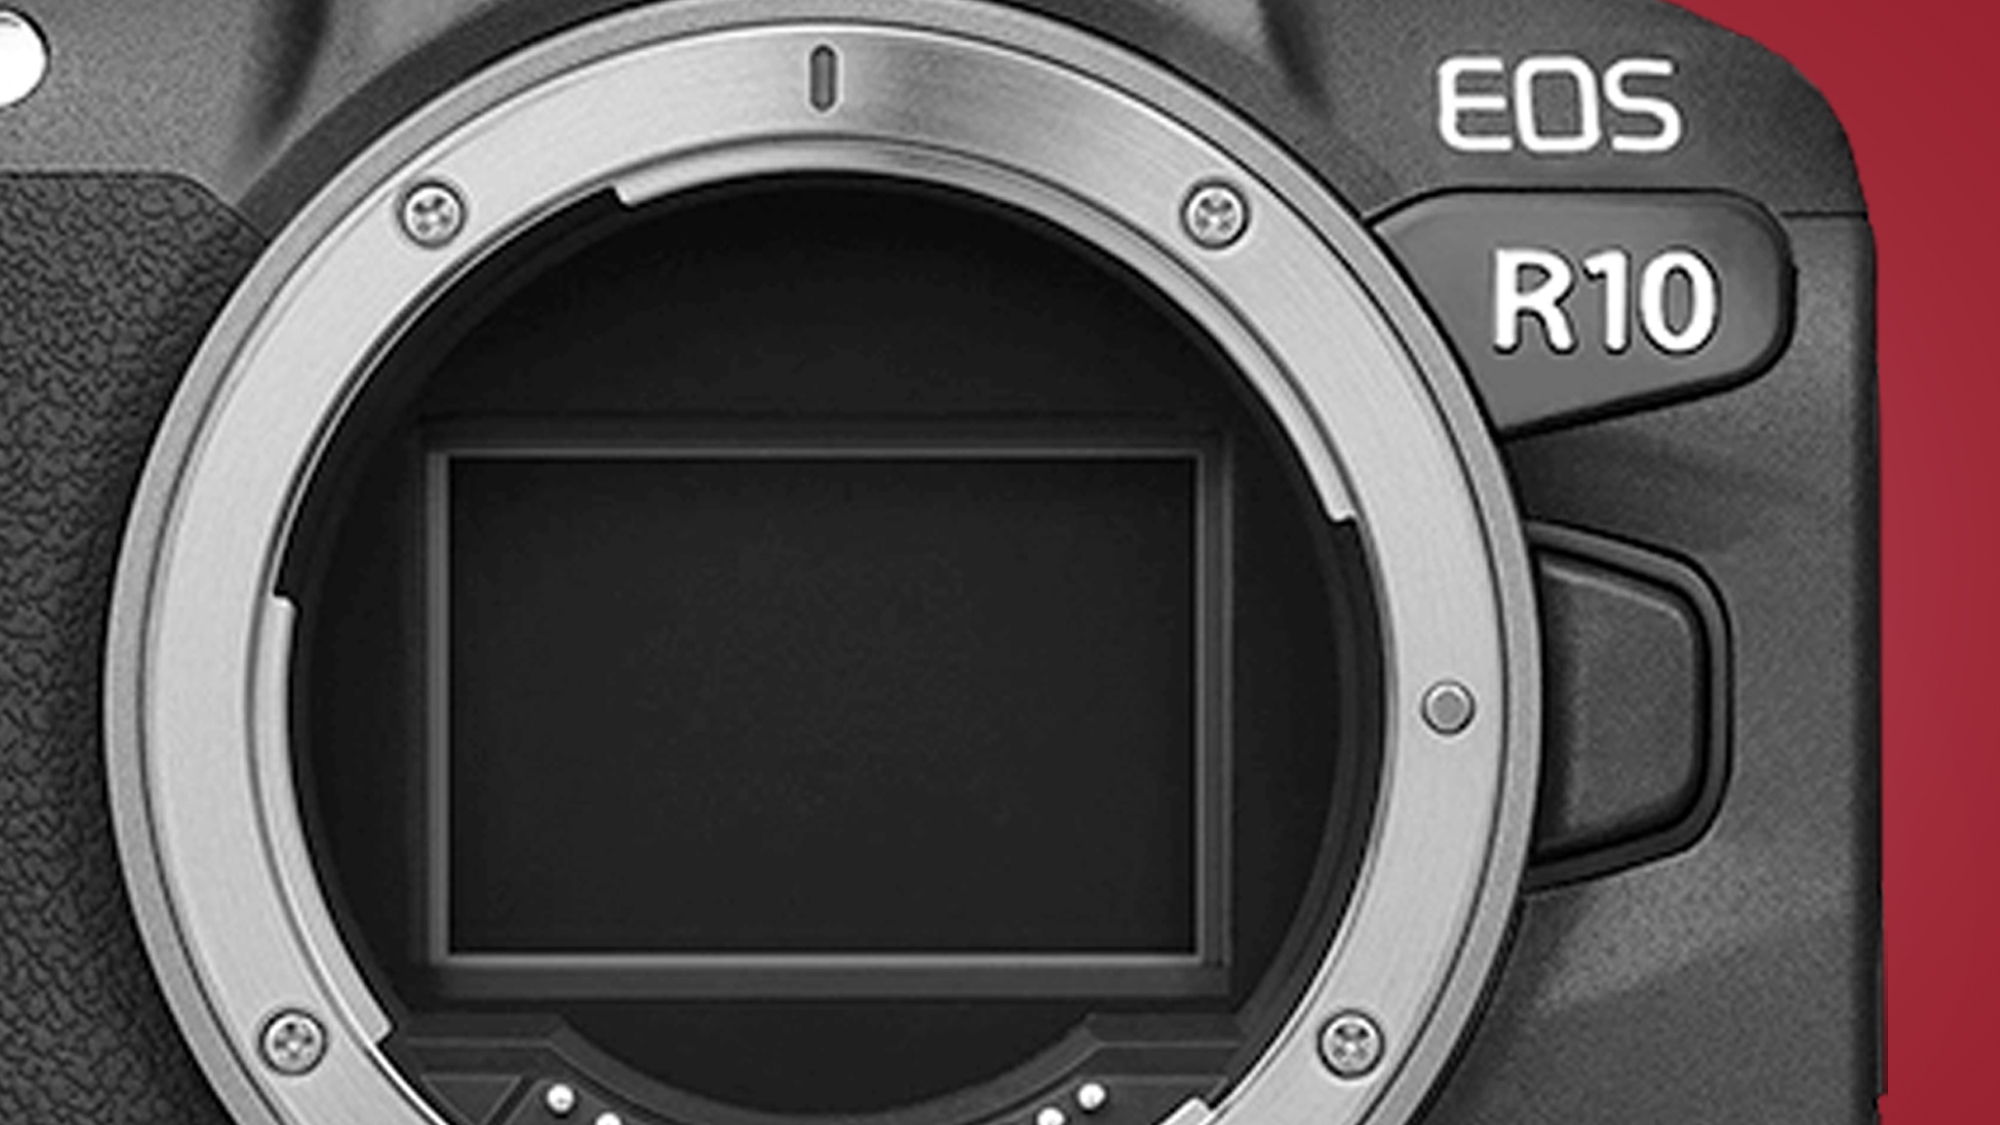 A mocked up image of the rumored Canon EOS R10 camera